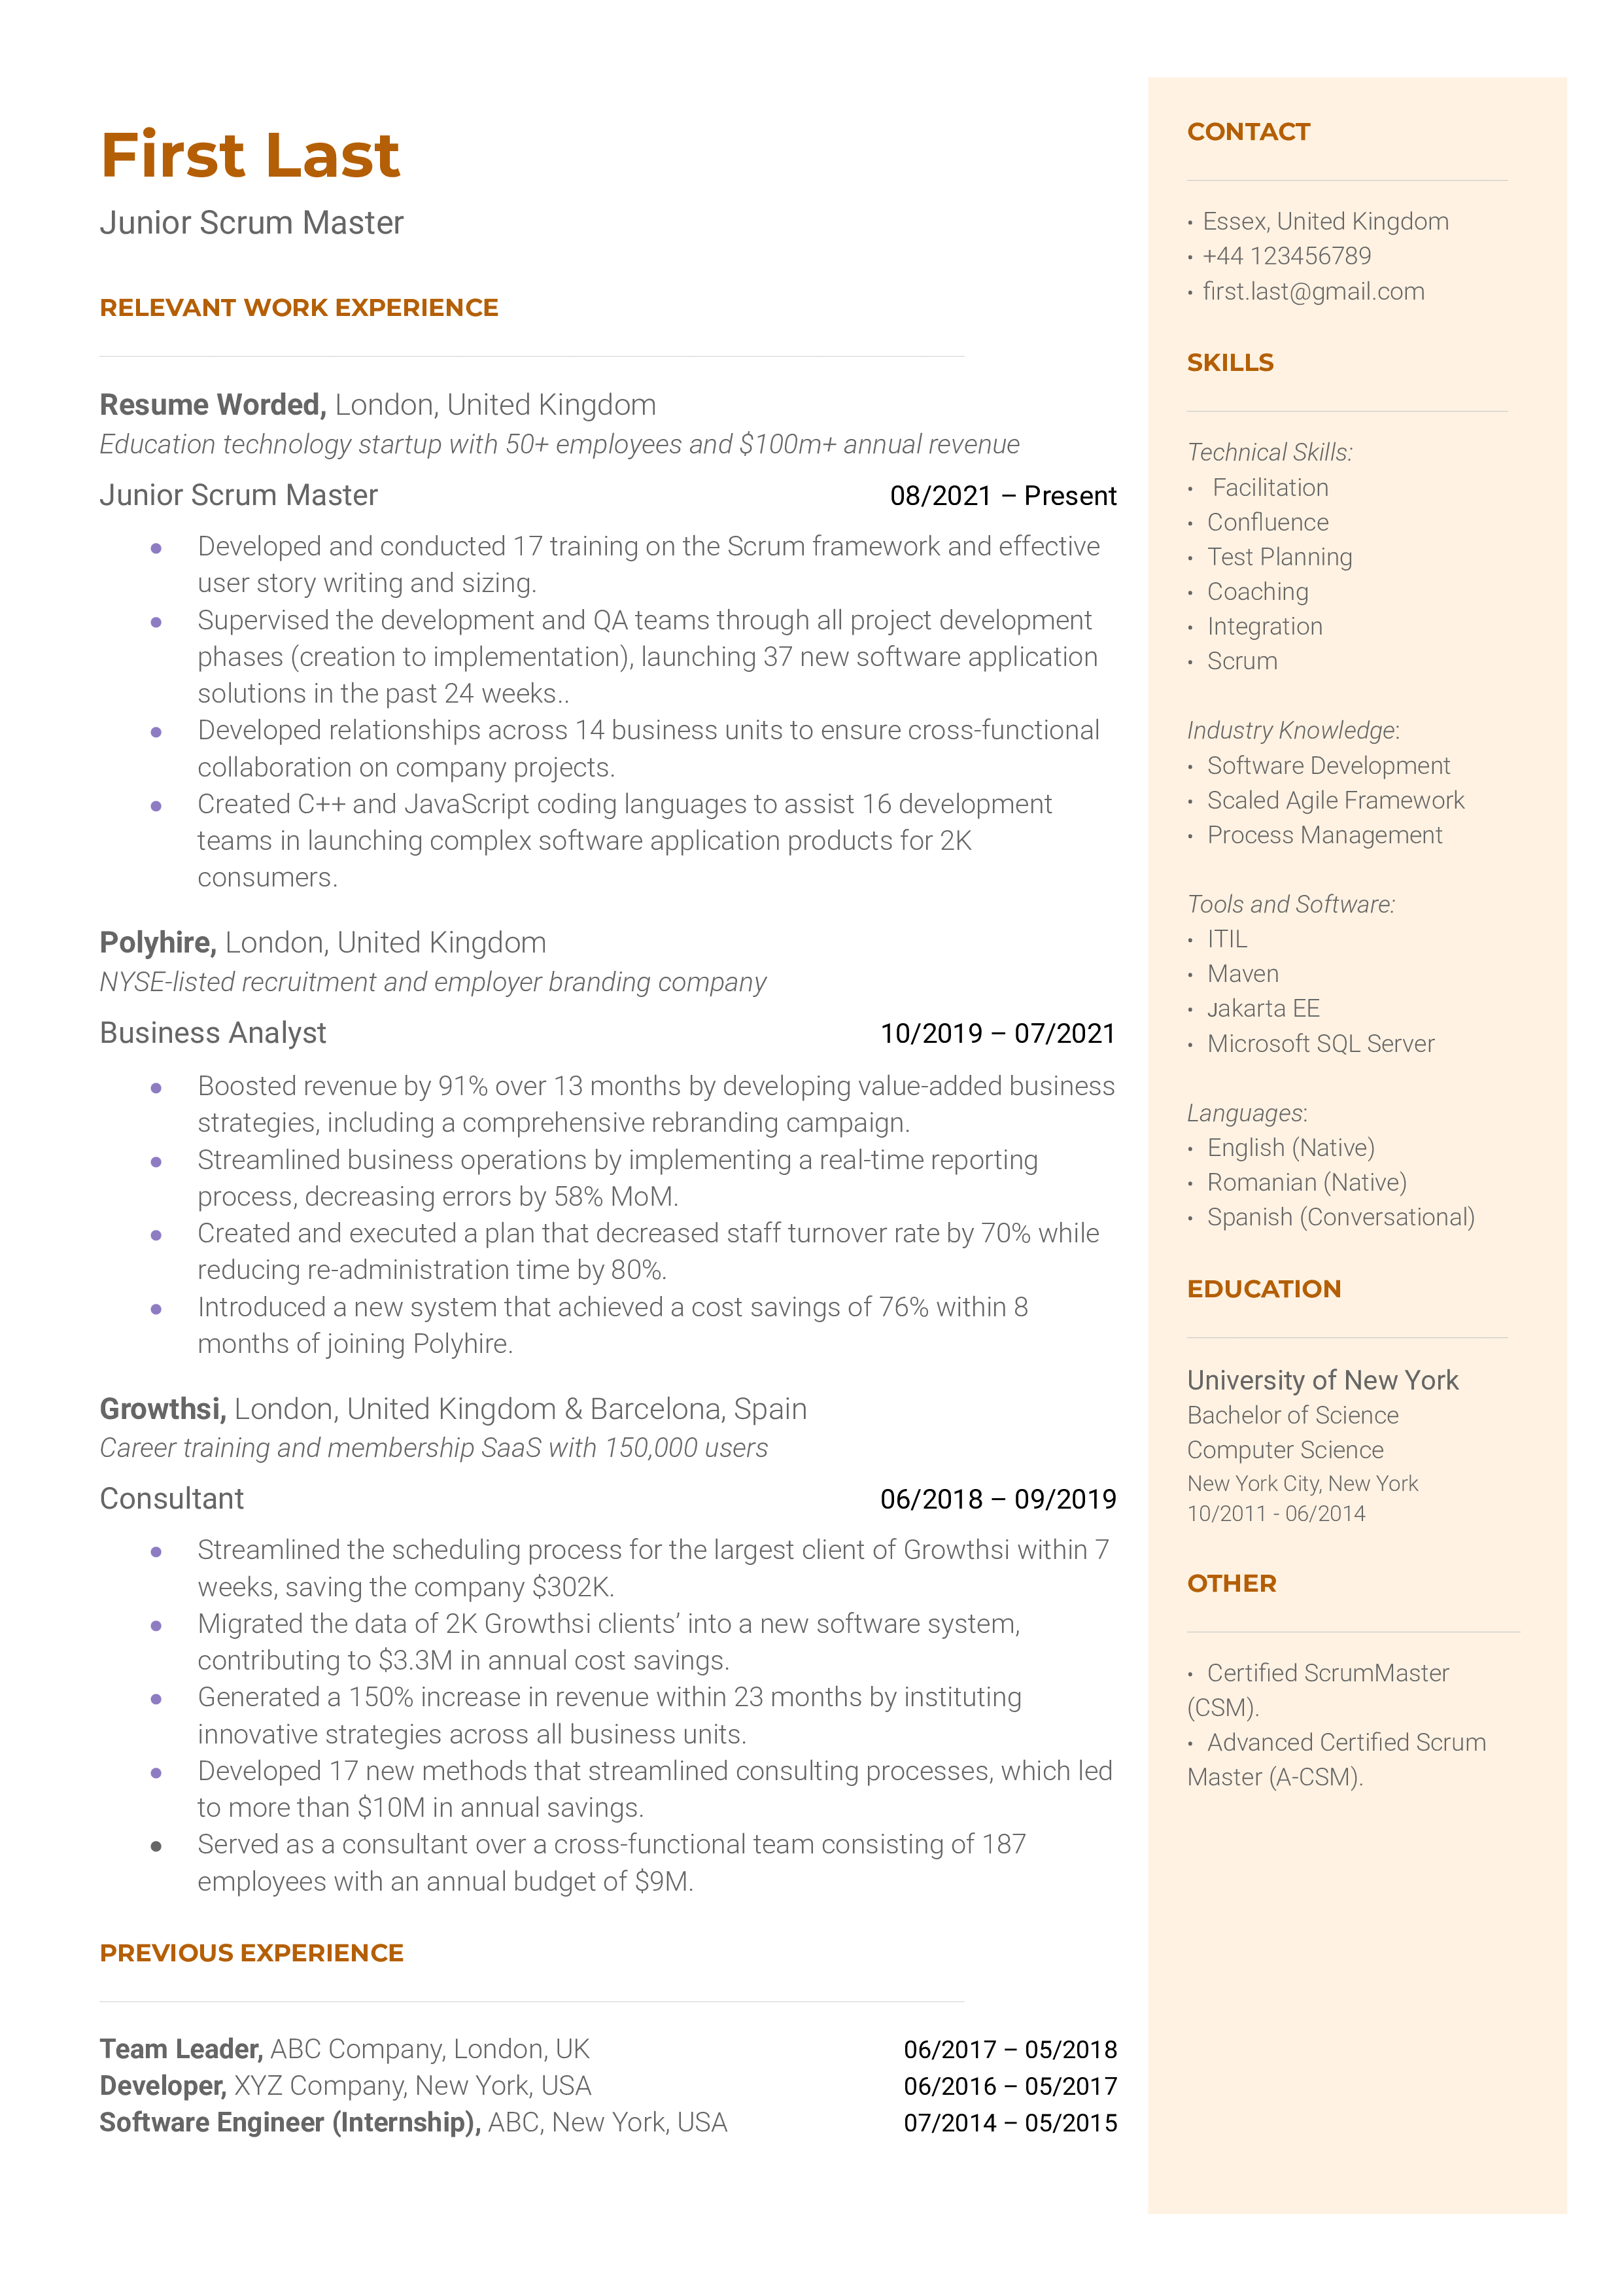 A junior scrum master resume sample highlighting the applicant’s technical experience and tools list.